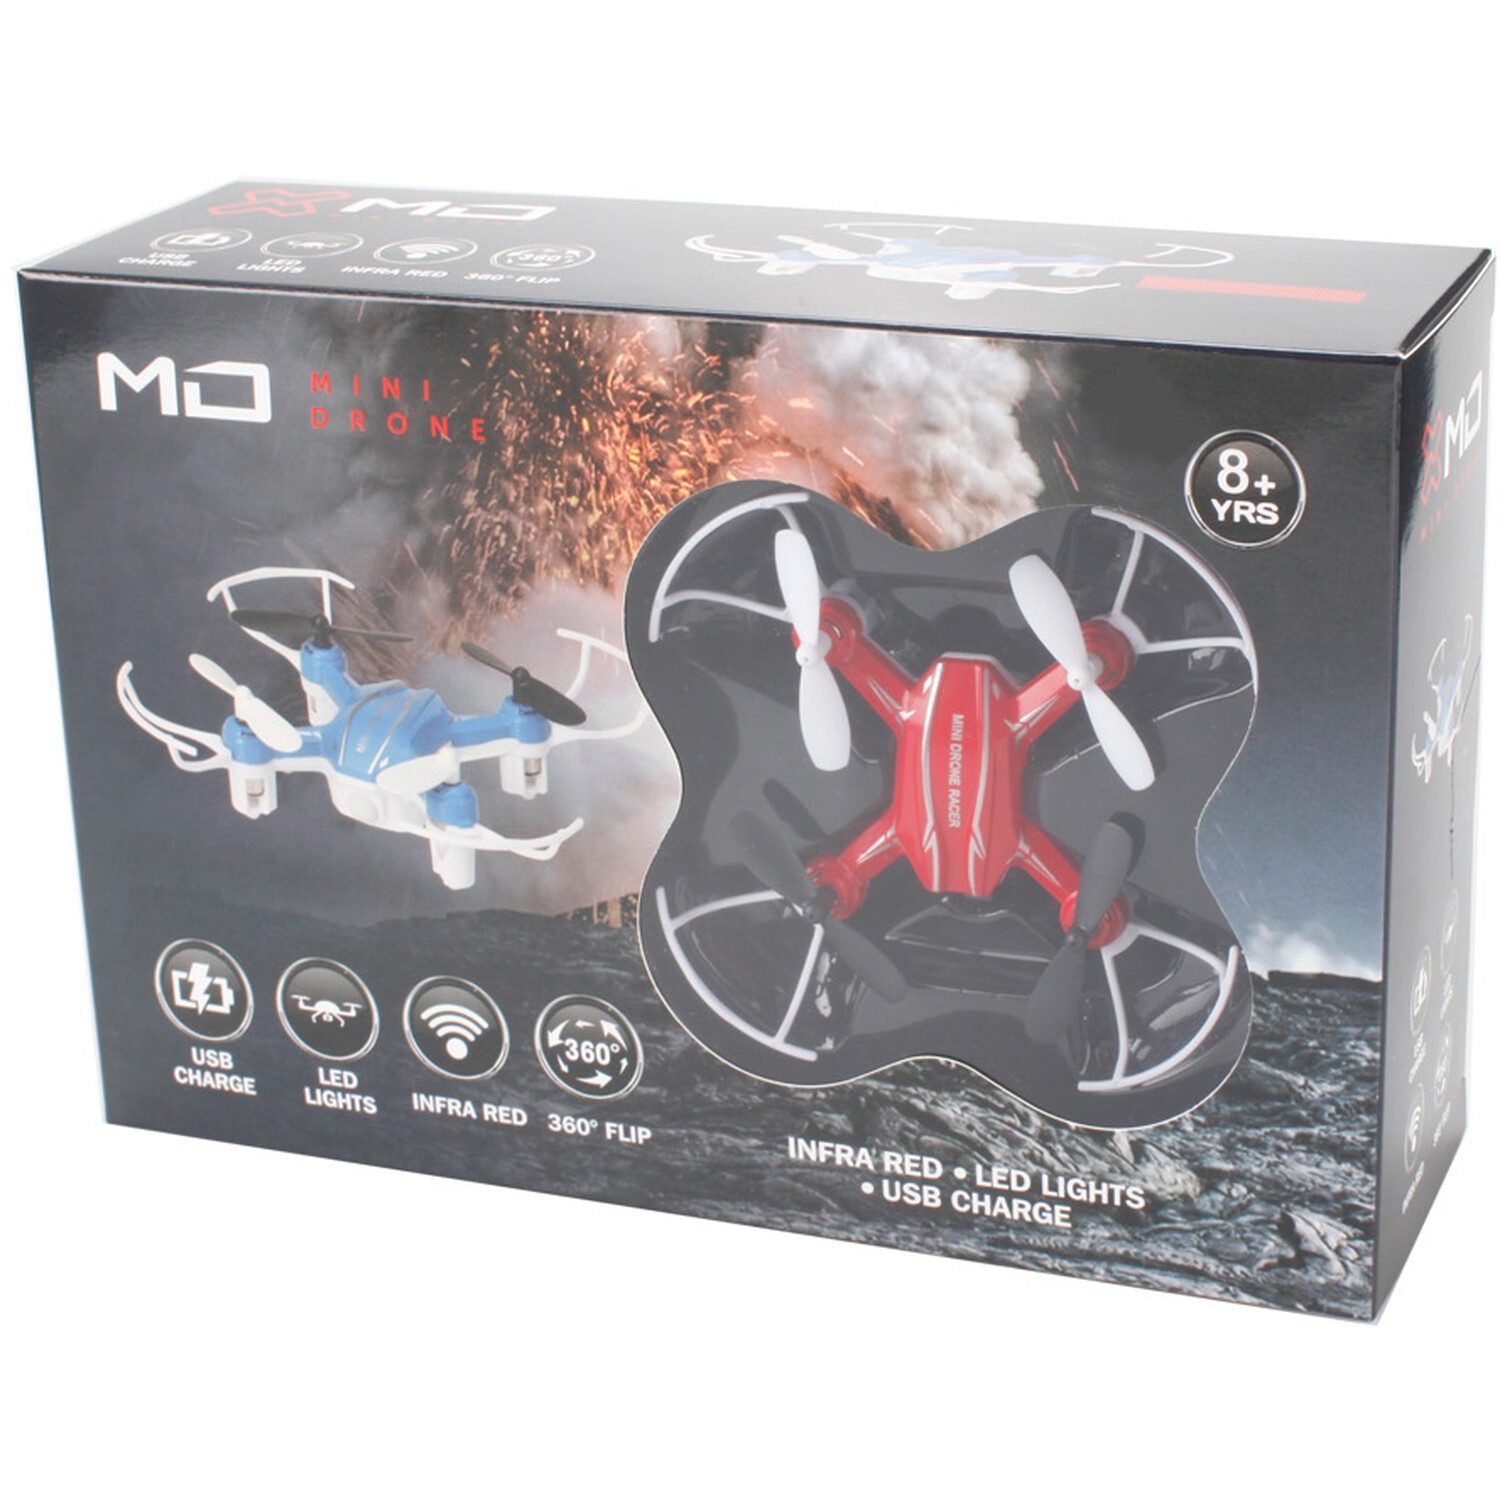 Single Anderton Toys Mini Drone in Assorted styles Image 1